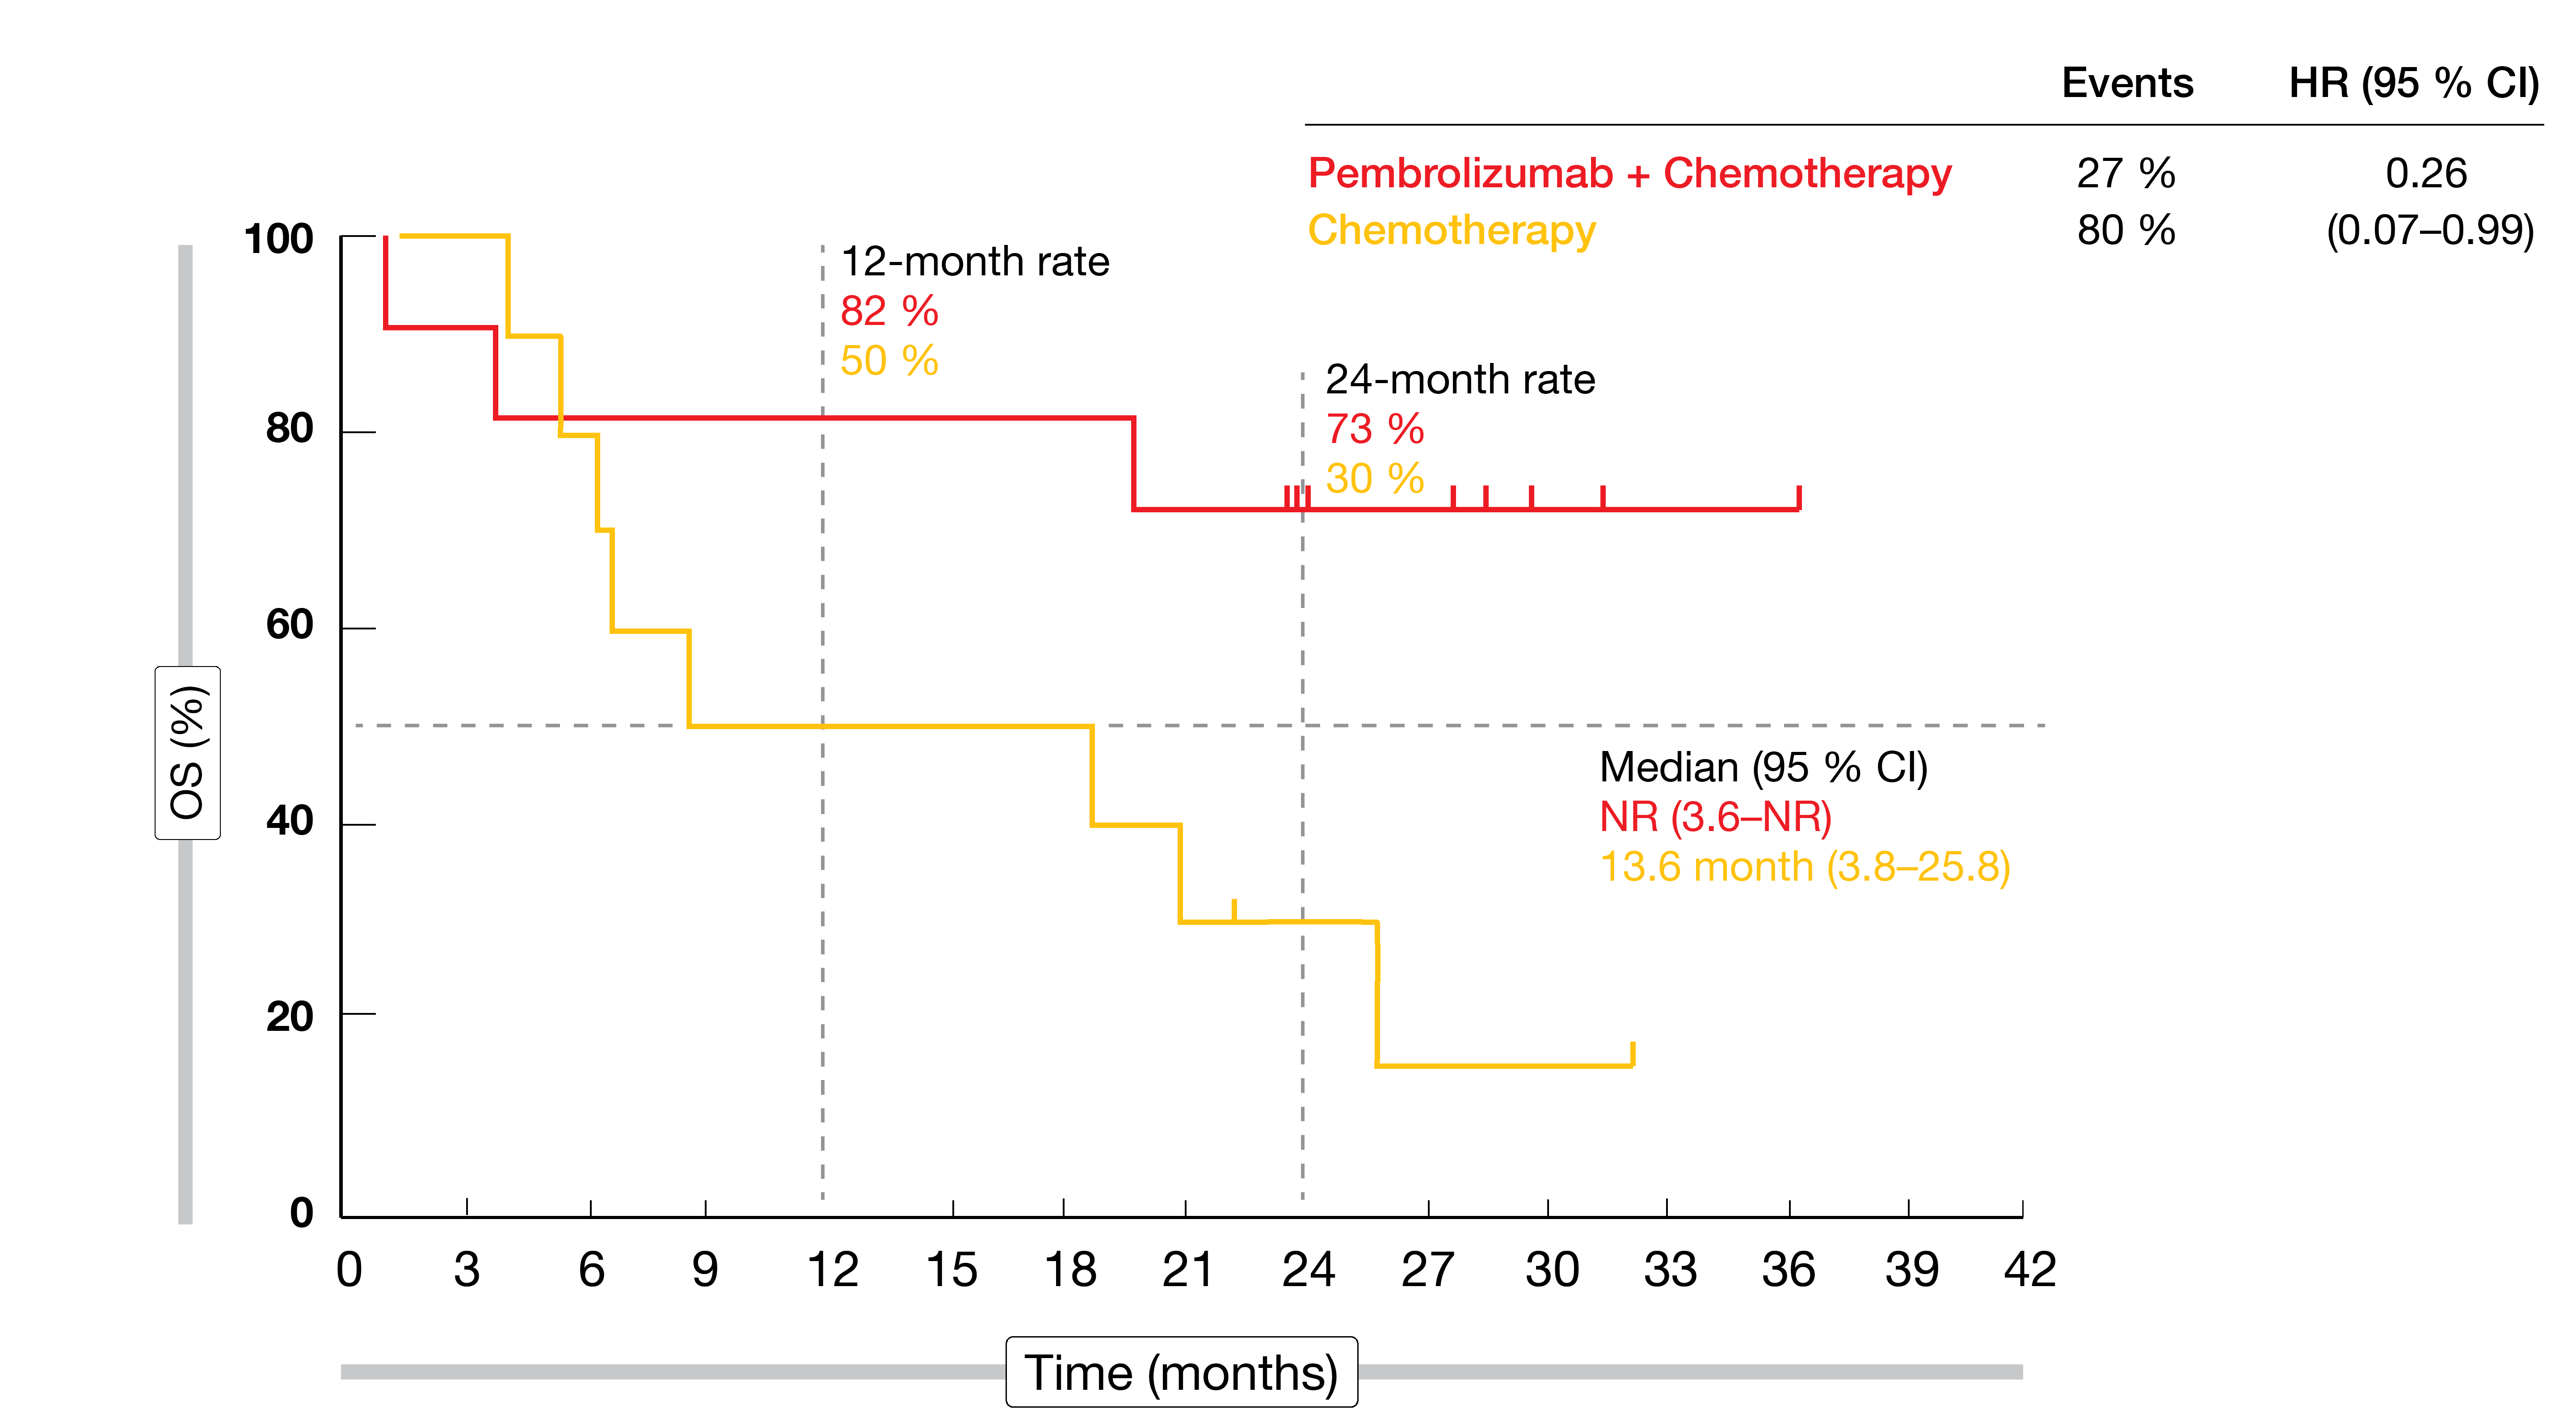 Figure 3: MSI-H cohort in the KEYNOTE-062 study: pembrolizumab plus chemotherapy vs. chemotherapy in patients with gastric or gastroesophageal carcinoma